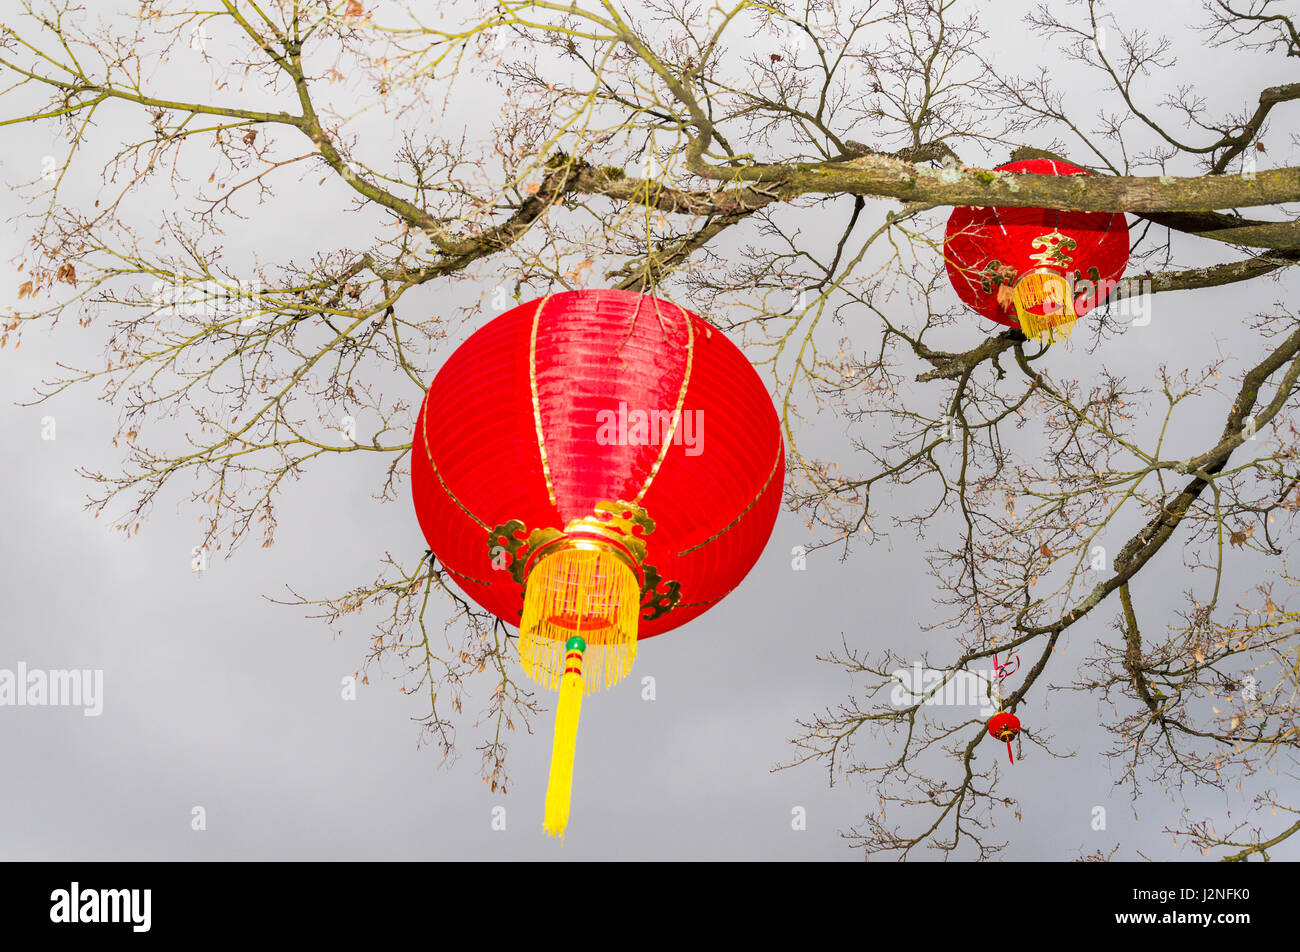 Red lanterns at Chinese New Year Celebration, Dr Sun-Yat Sen Classical Garden, Chinatown, Vancouver, British Columbia, Canada Stock Photo